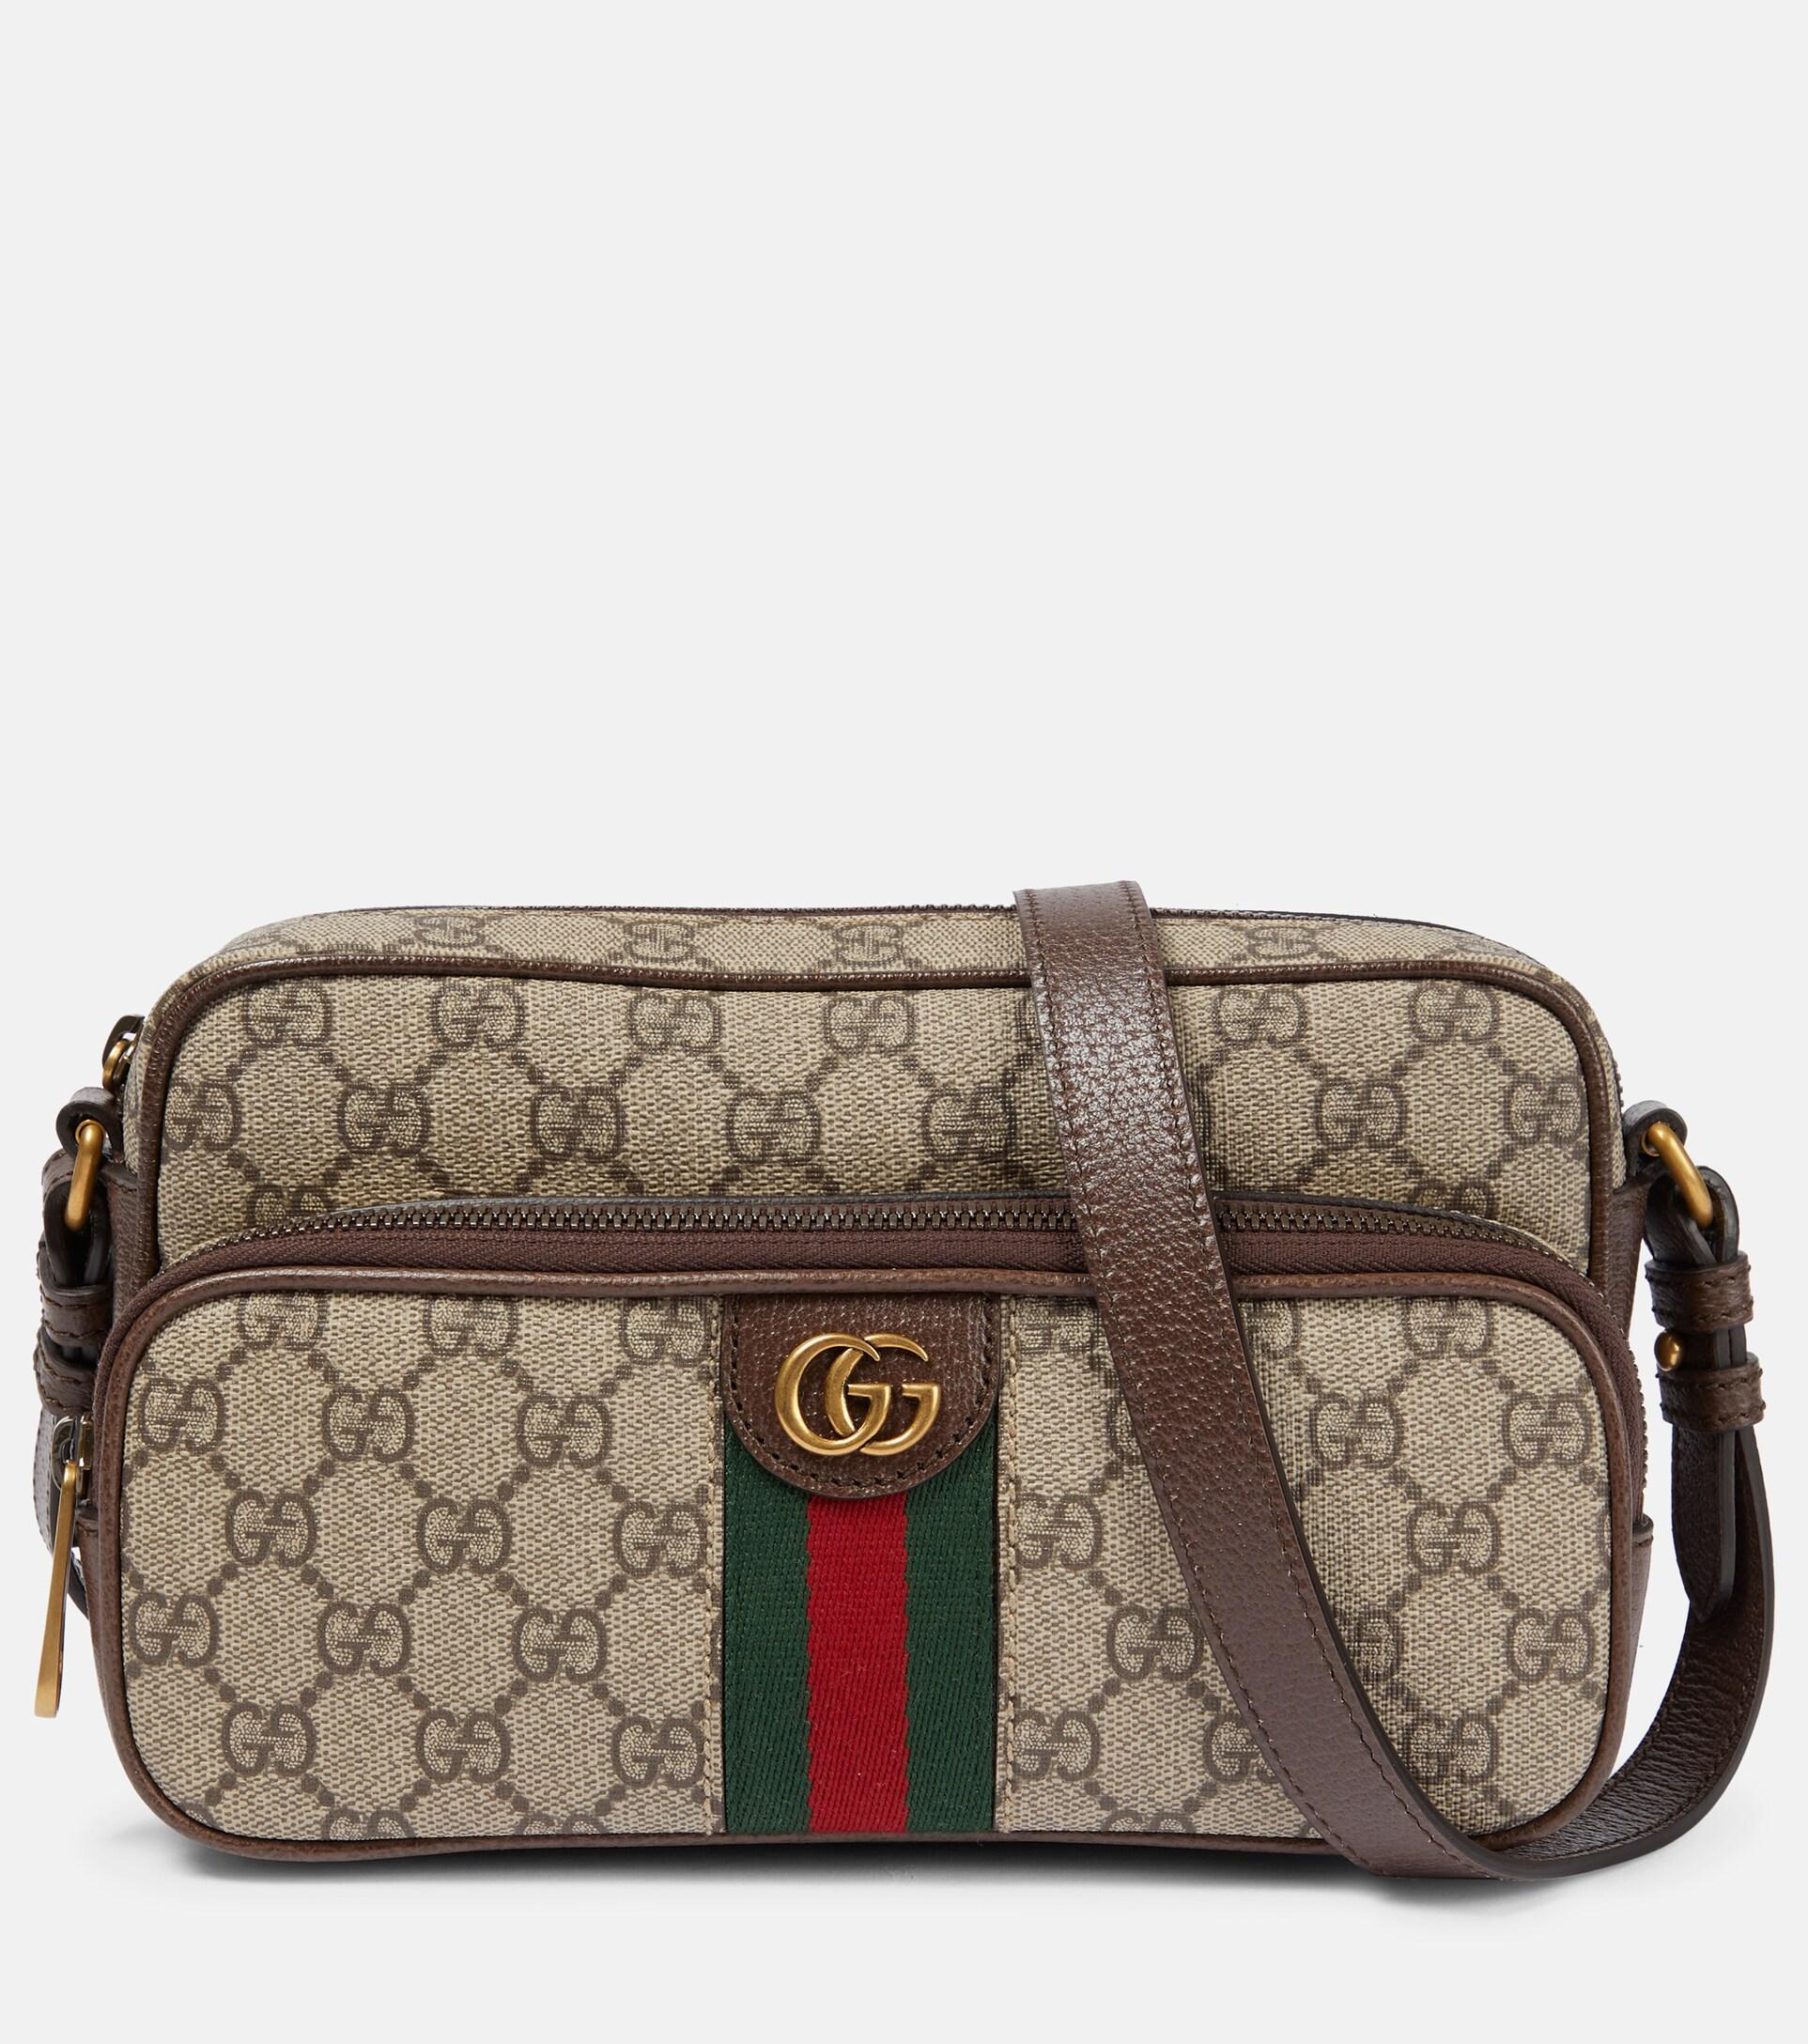 Gucci Ophidia Small Canvas Messenger Bag in Brown | Lyst